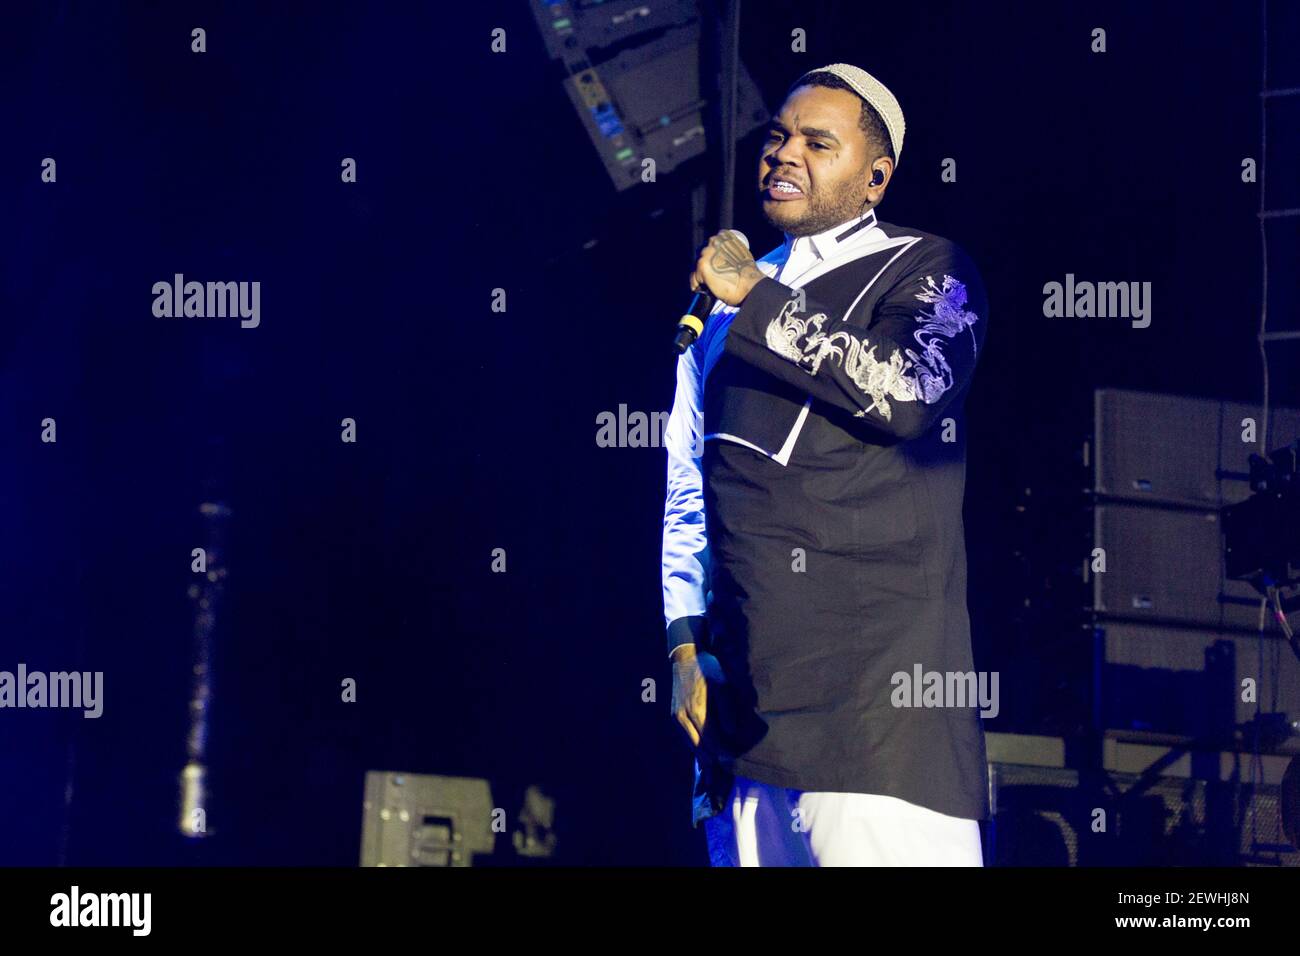 Rapper Kevin Gates During The High Road Tour At Hollywood Casino Amphitheater On August 16 2016 In Tinley Park Illinois Photo By Daniel Desloverimagespace Please Use Credit From Credit Field 2EWHJ8N 